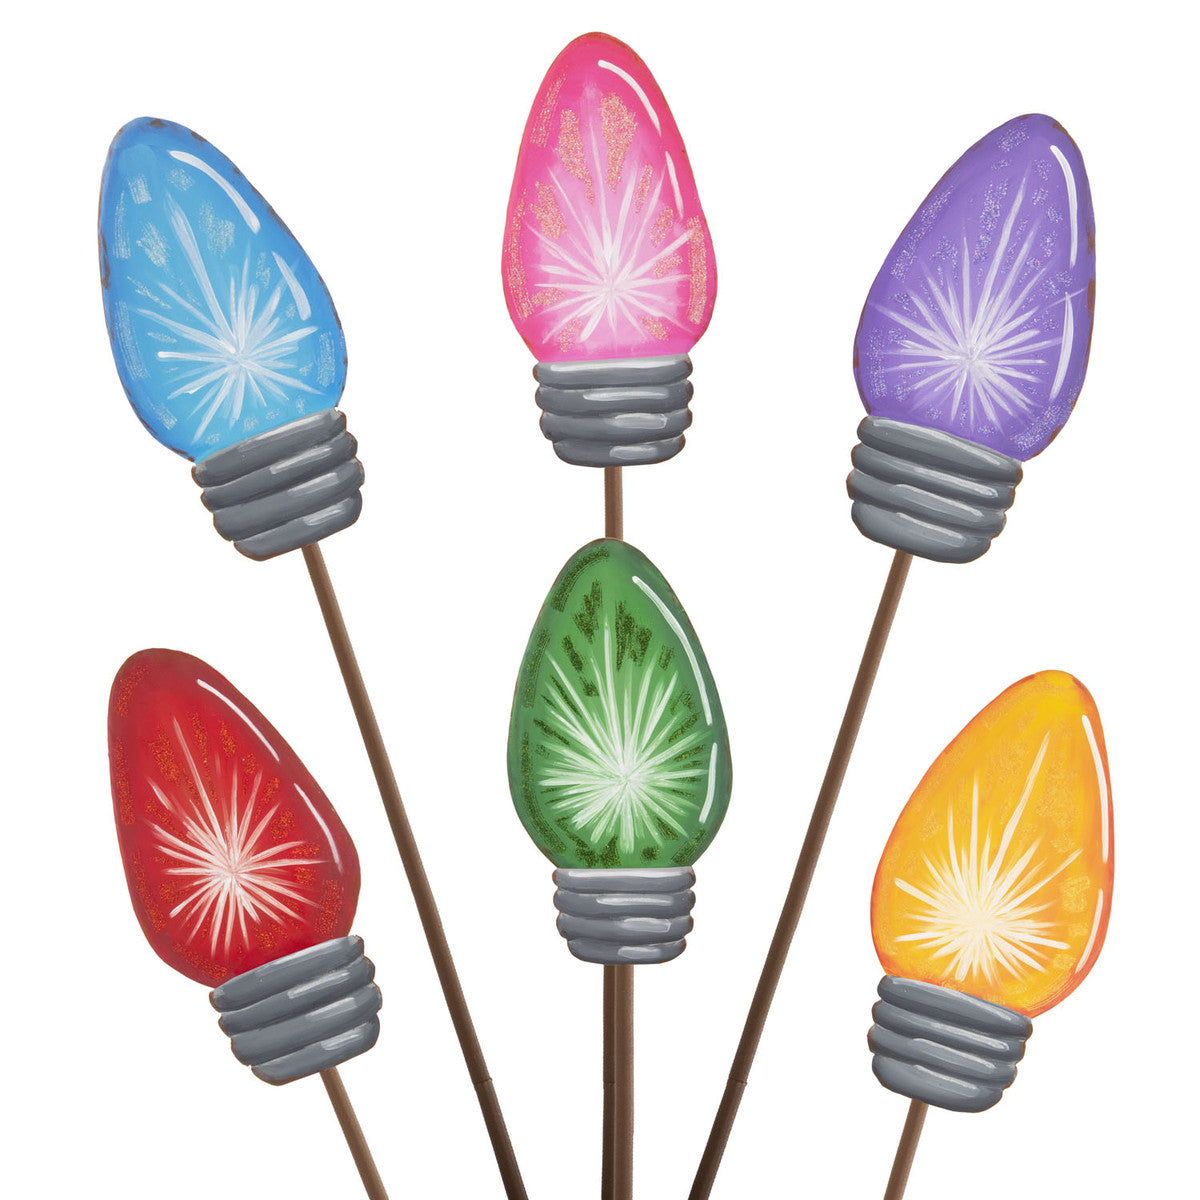 Merry & Bright Bulb Stakes